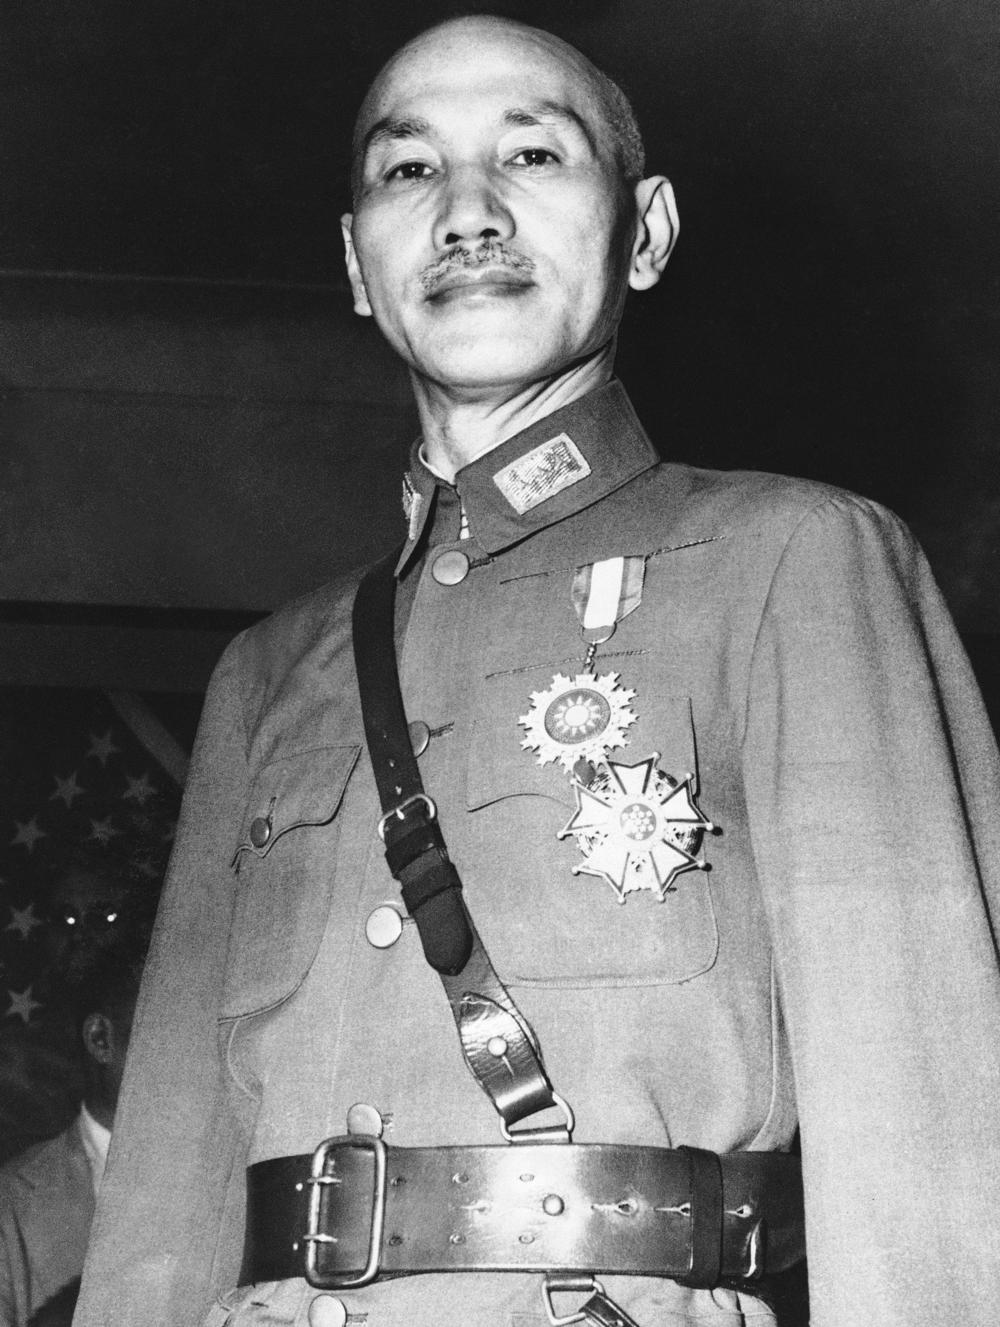 Chiang Kai-shek, after he had been presented with the U.S. Legion of Merit medal from Lt. Gen. Joseph Stilwell, commander of U.S. Forces in the China, Burma Indian theater of World War II, in 1943.